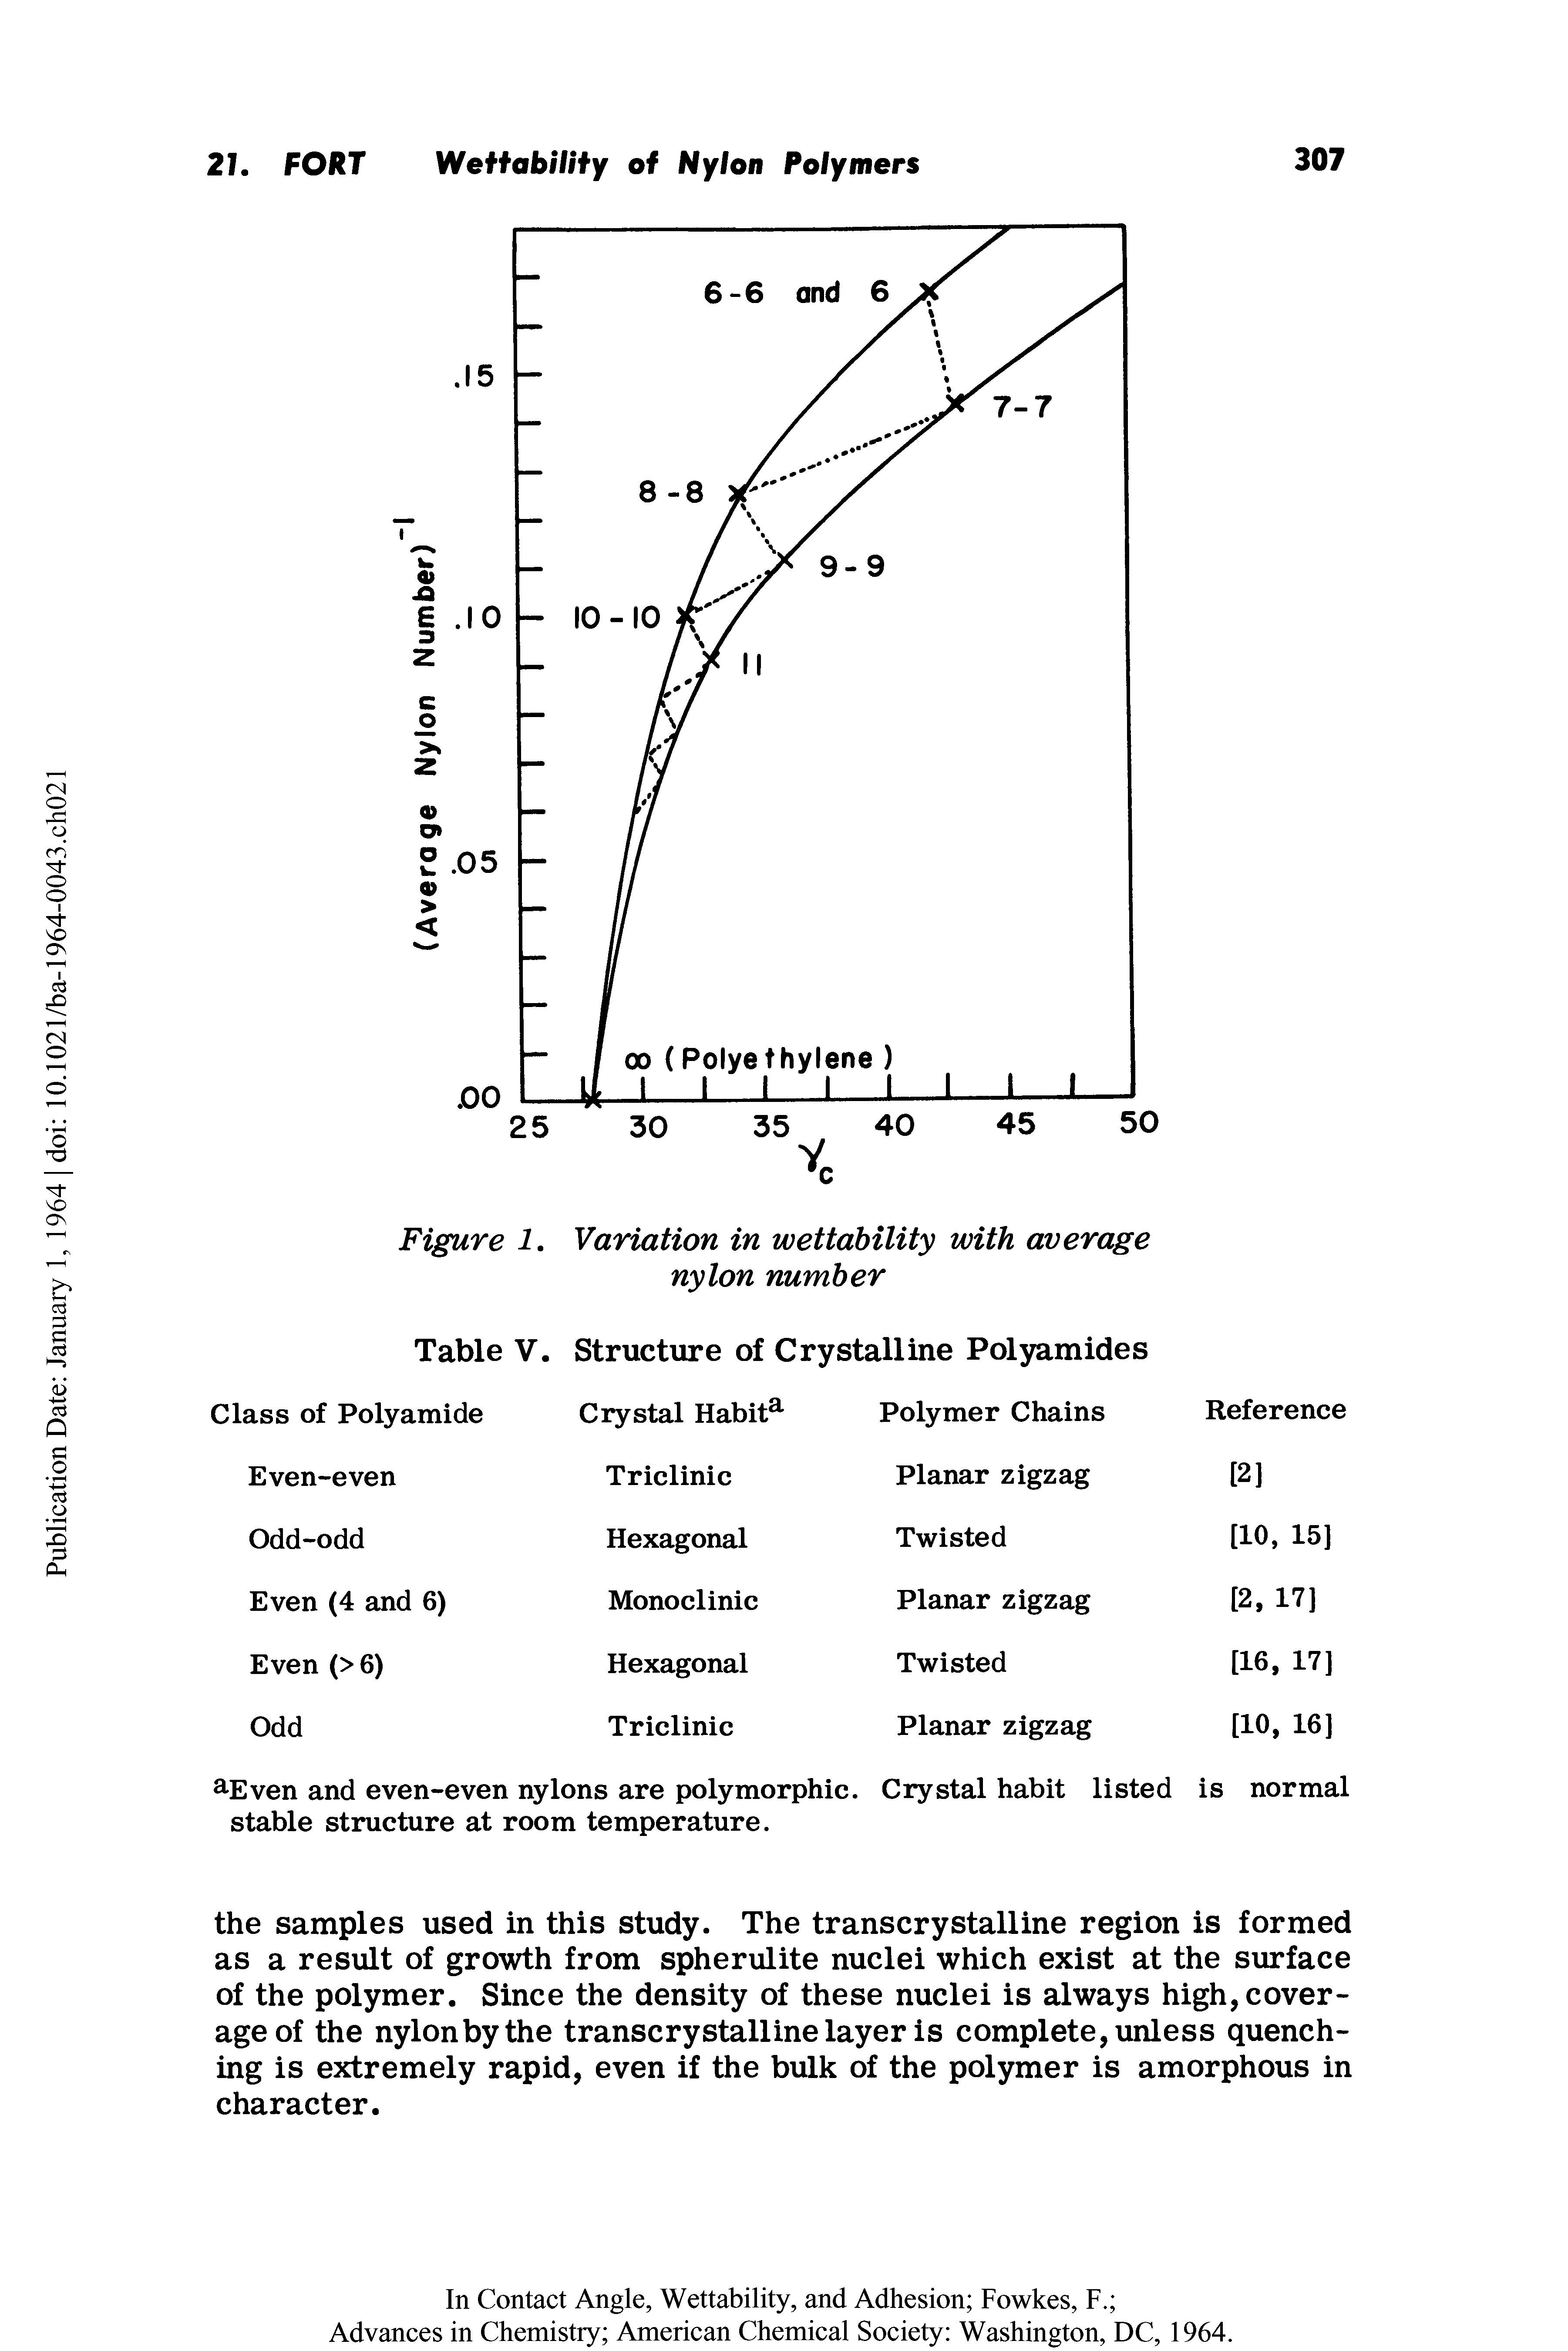 Figure 1. Variation in wettability with average nylon number...